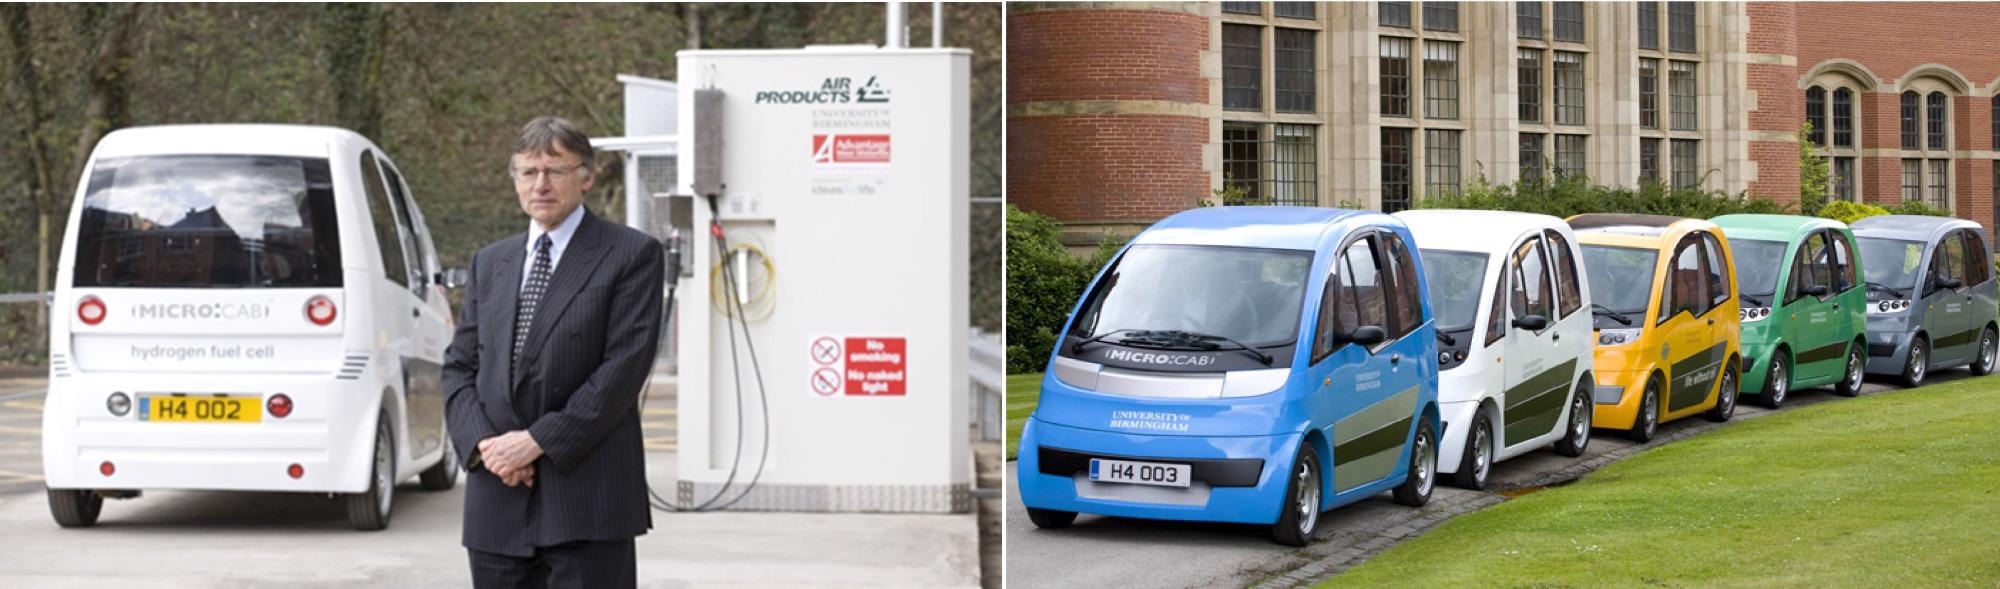 Left: First UK green hydrogen station opened in 2008 at the University of Birmingham by K Kendall; Right: five hydrogen-fuel-cell-battery-electric-Microcab cars tested on campus over 5 years.